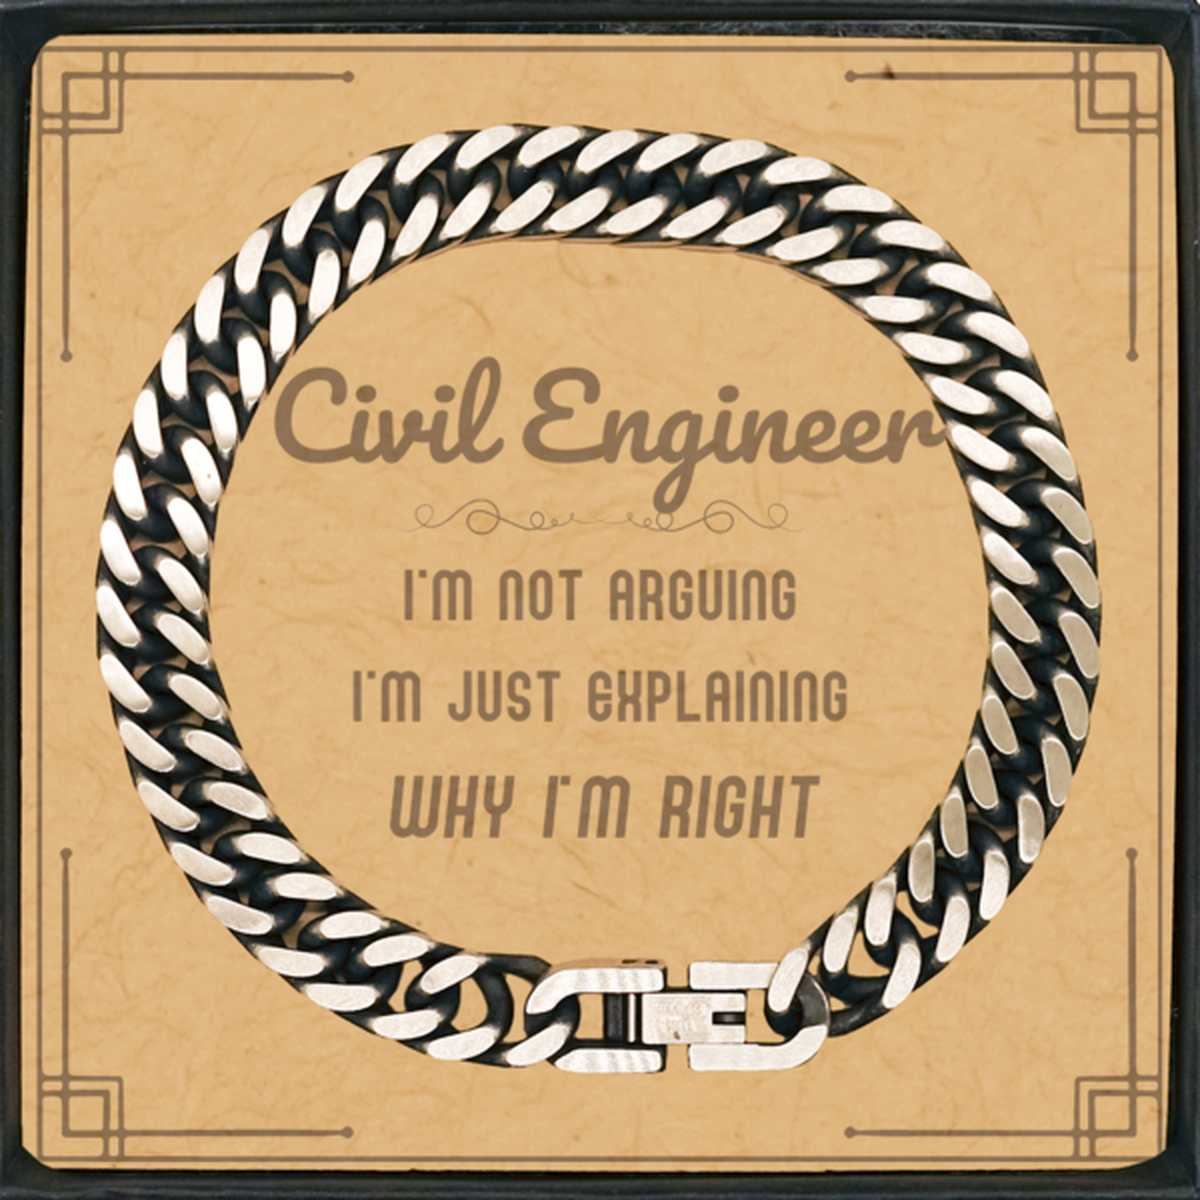 Civil Engineer I'm not Arguing. I'm Just Explaining Why I'm RIGHT Cuban Link Chain Bracelet, Funny Saying Quote Civil Engineer Gifts For Civil Engineer Message Card Graduation Birthday Christmas Gifts for Men Women Coworker